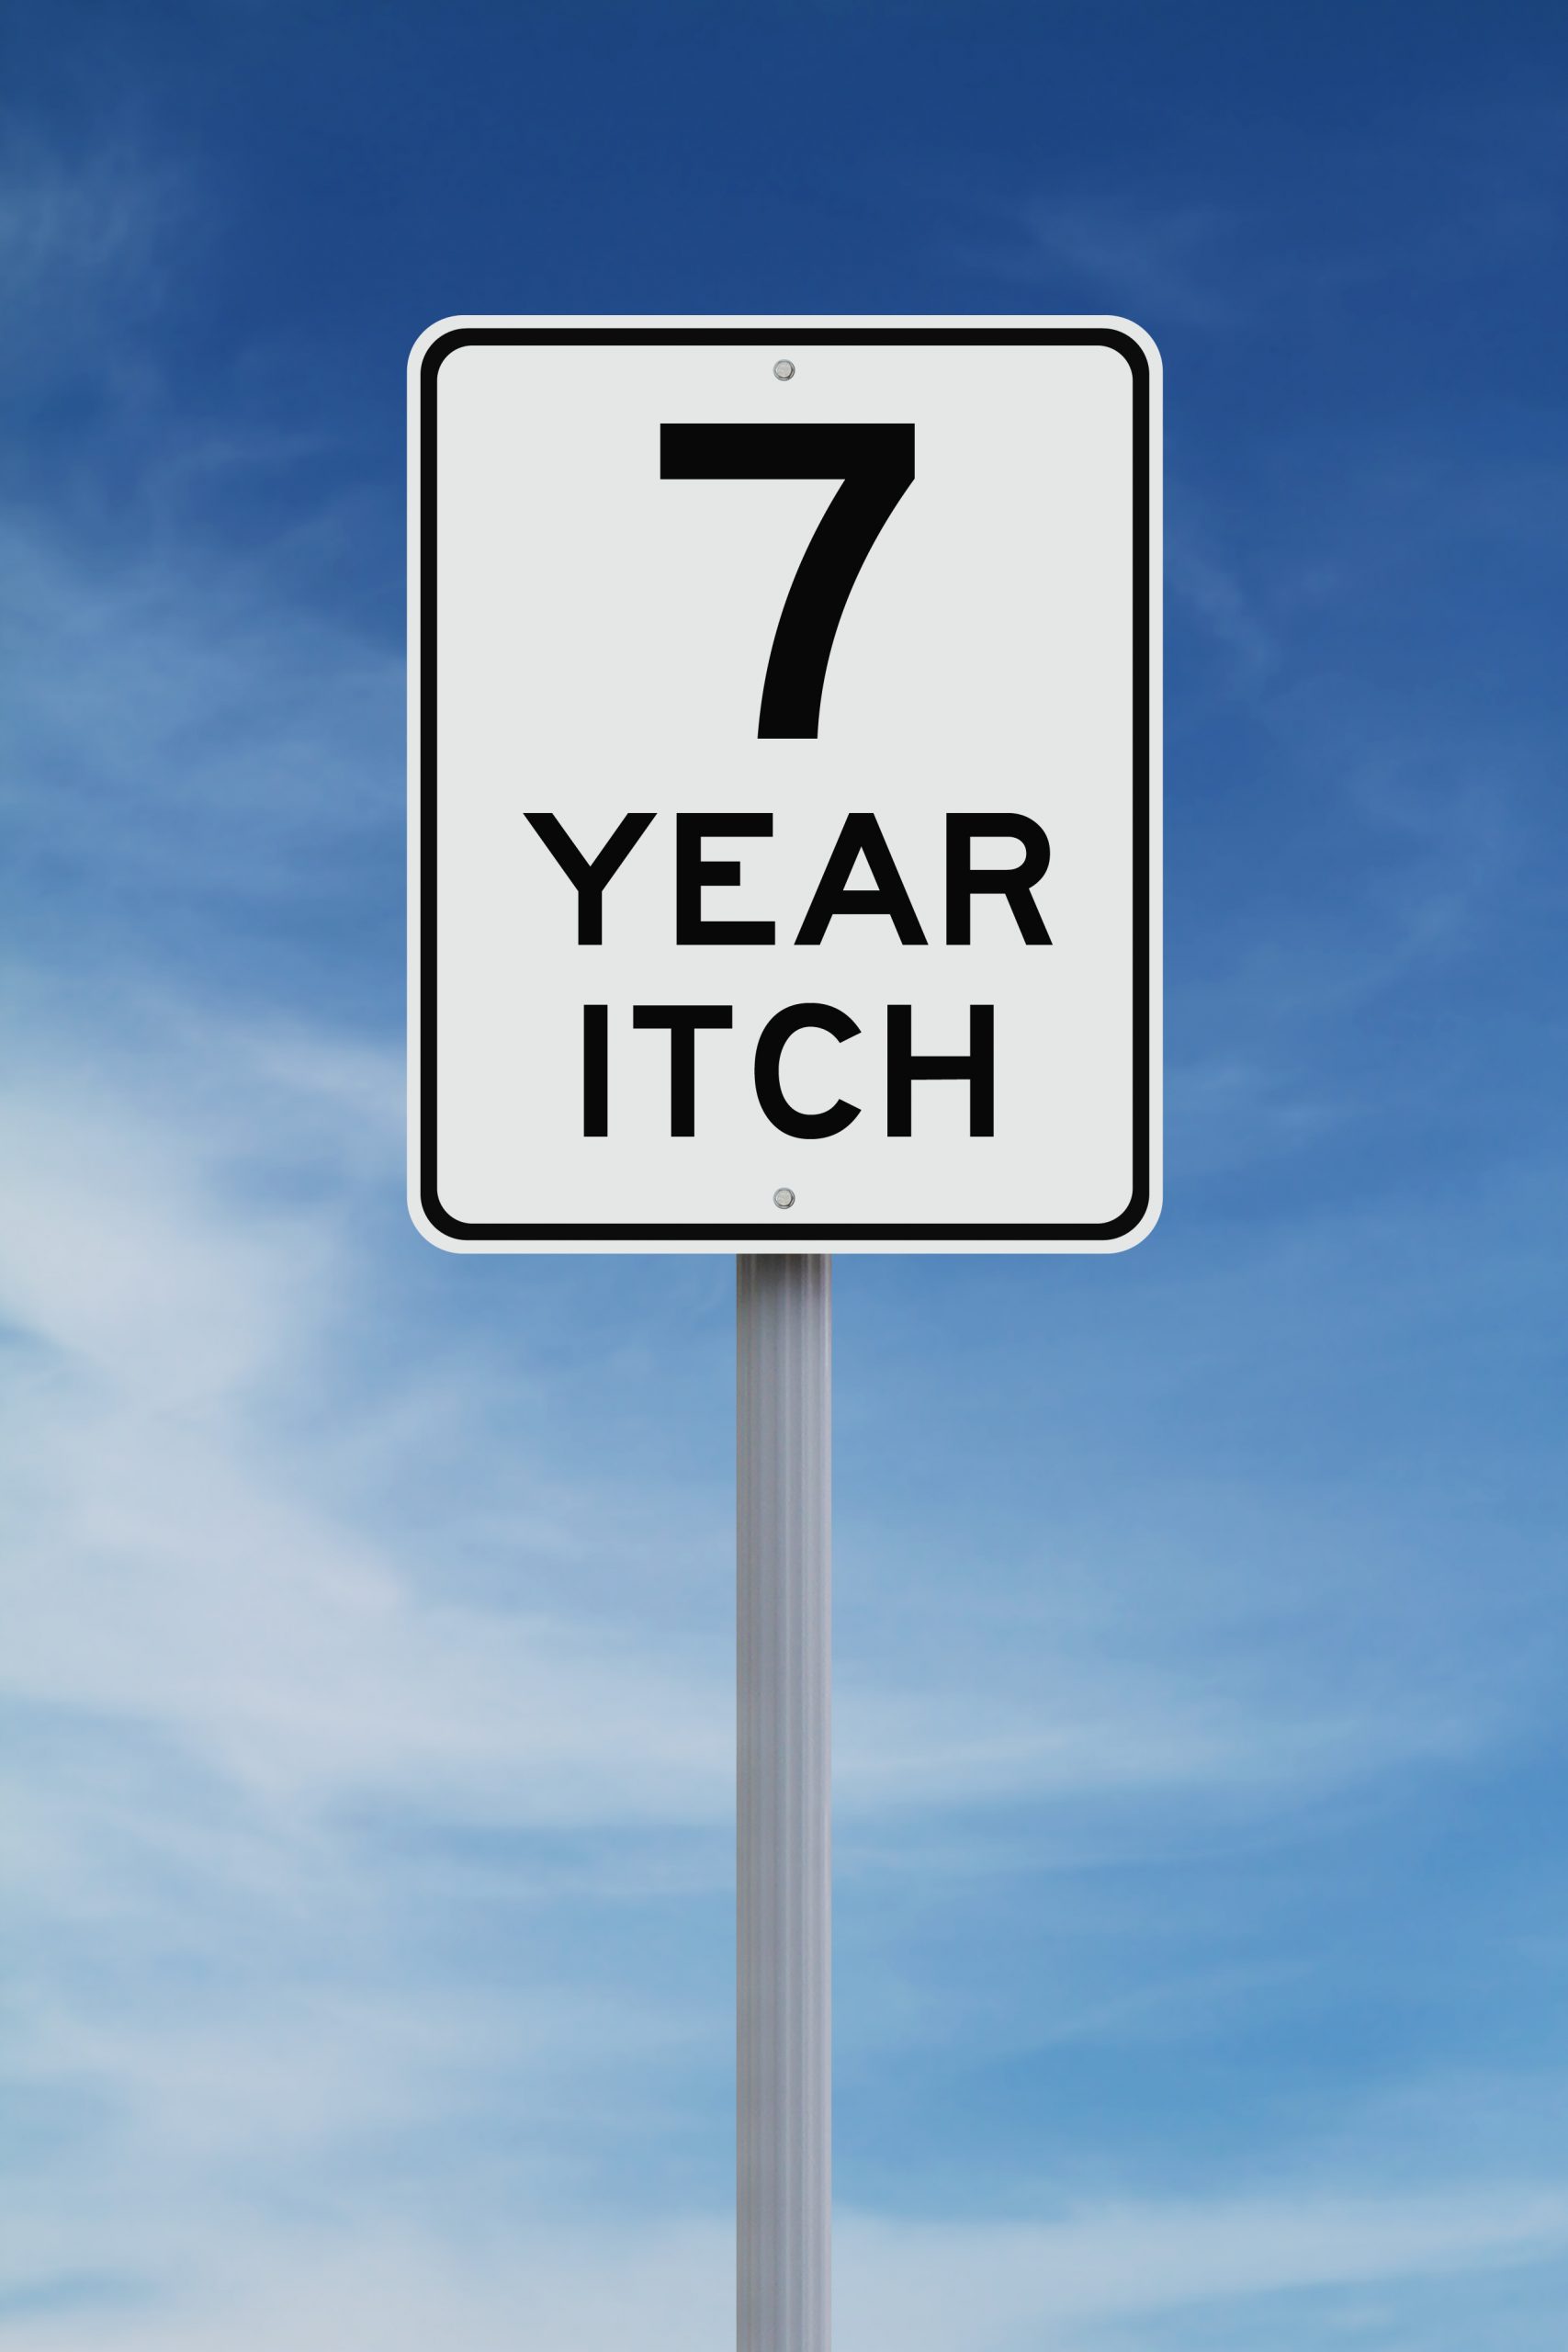 street sign that says 7 year itch